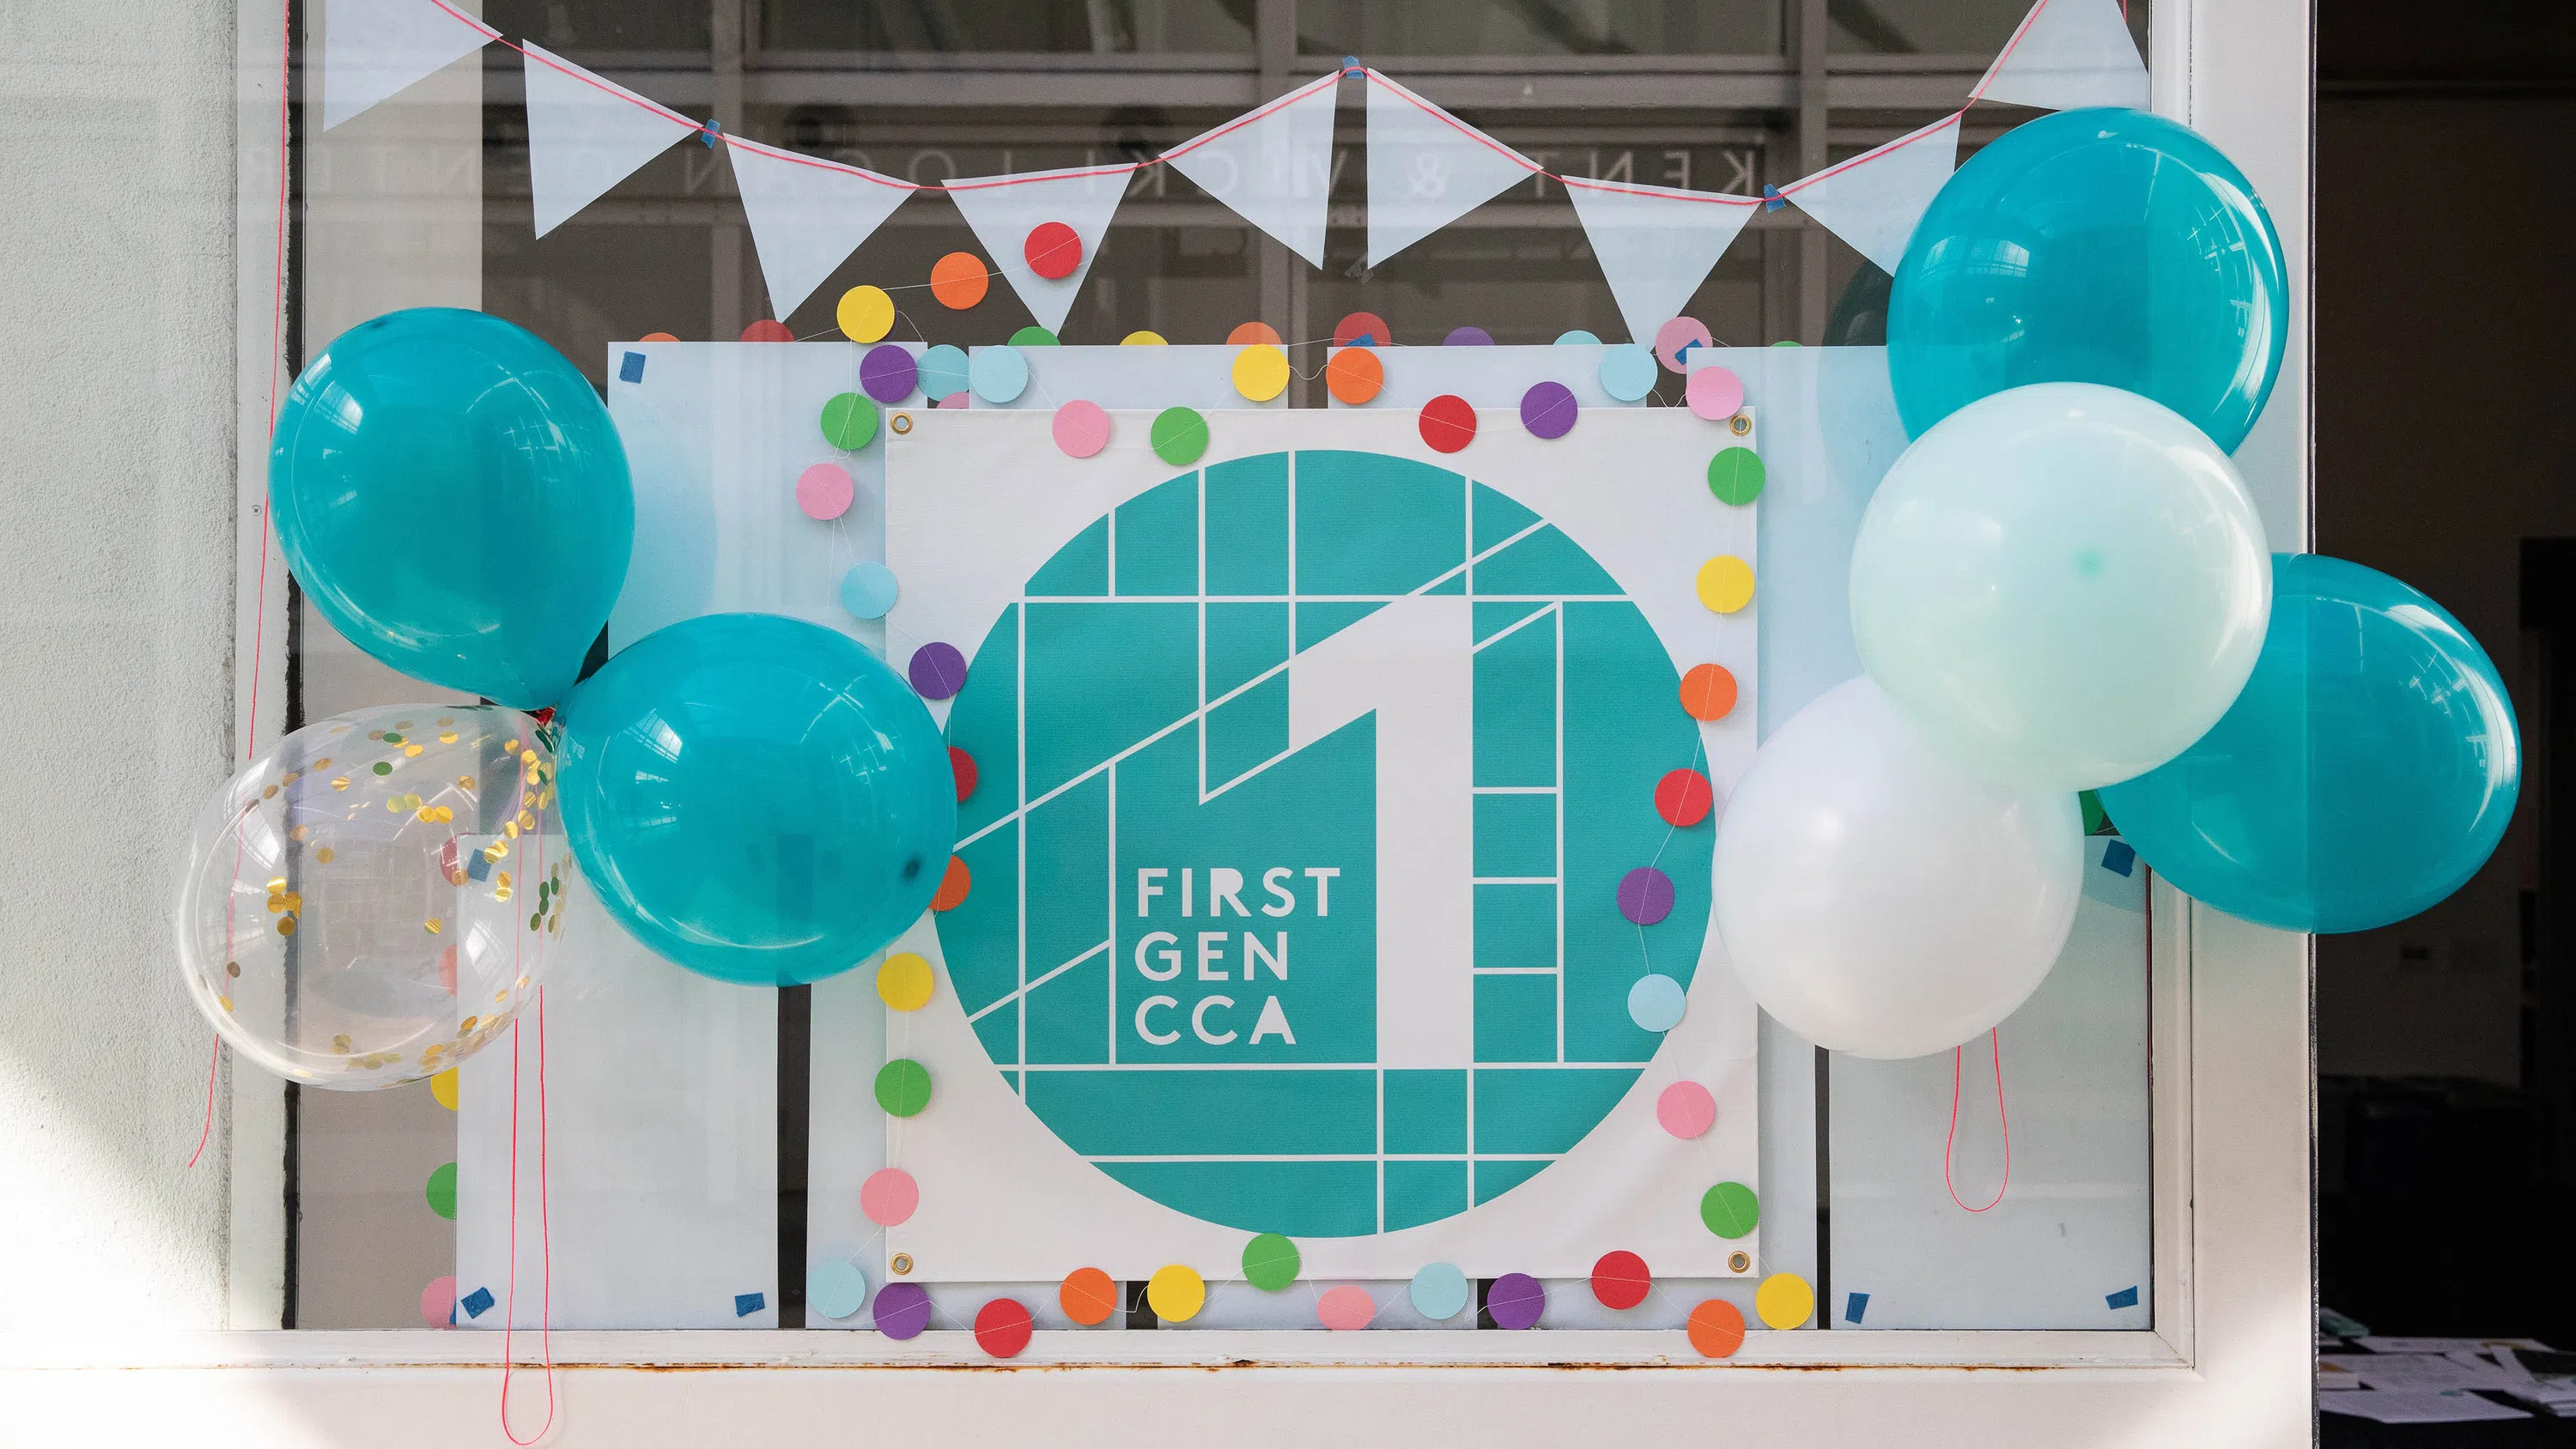 Balloons, flags, and colorful dots surround a teal-and-white poster that reads “First Gen CCA 1.”